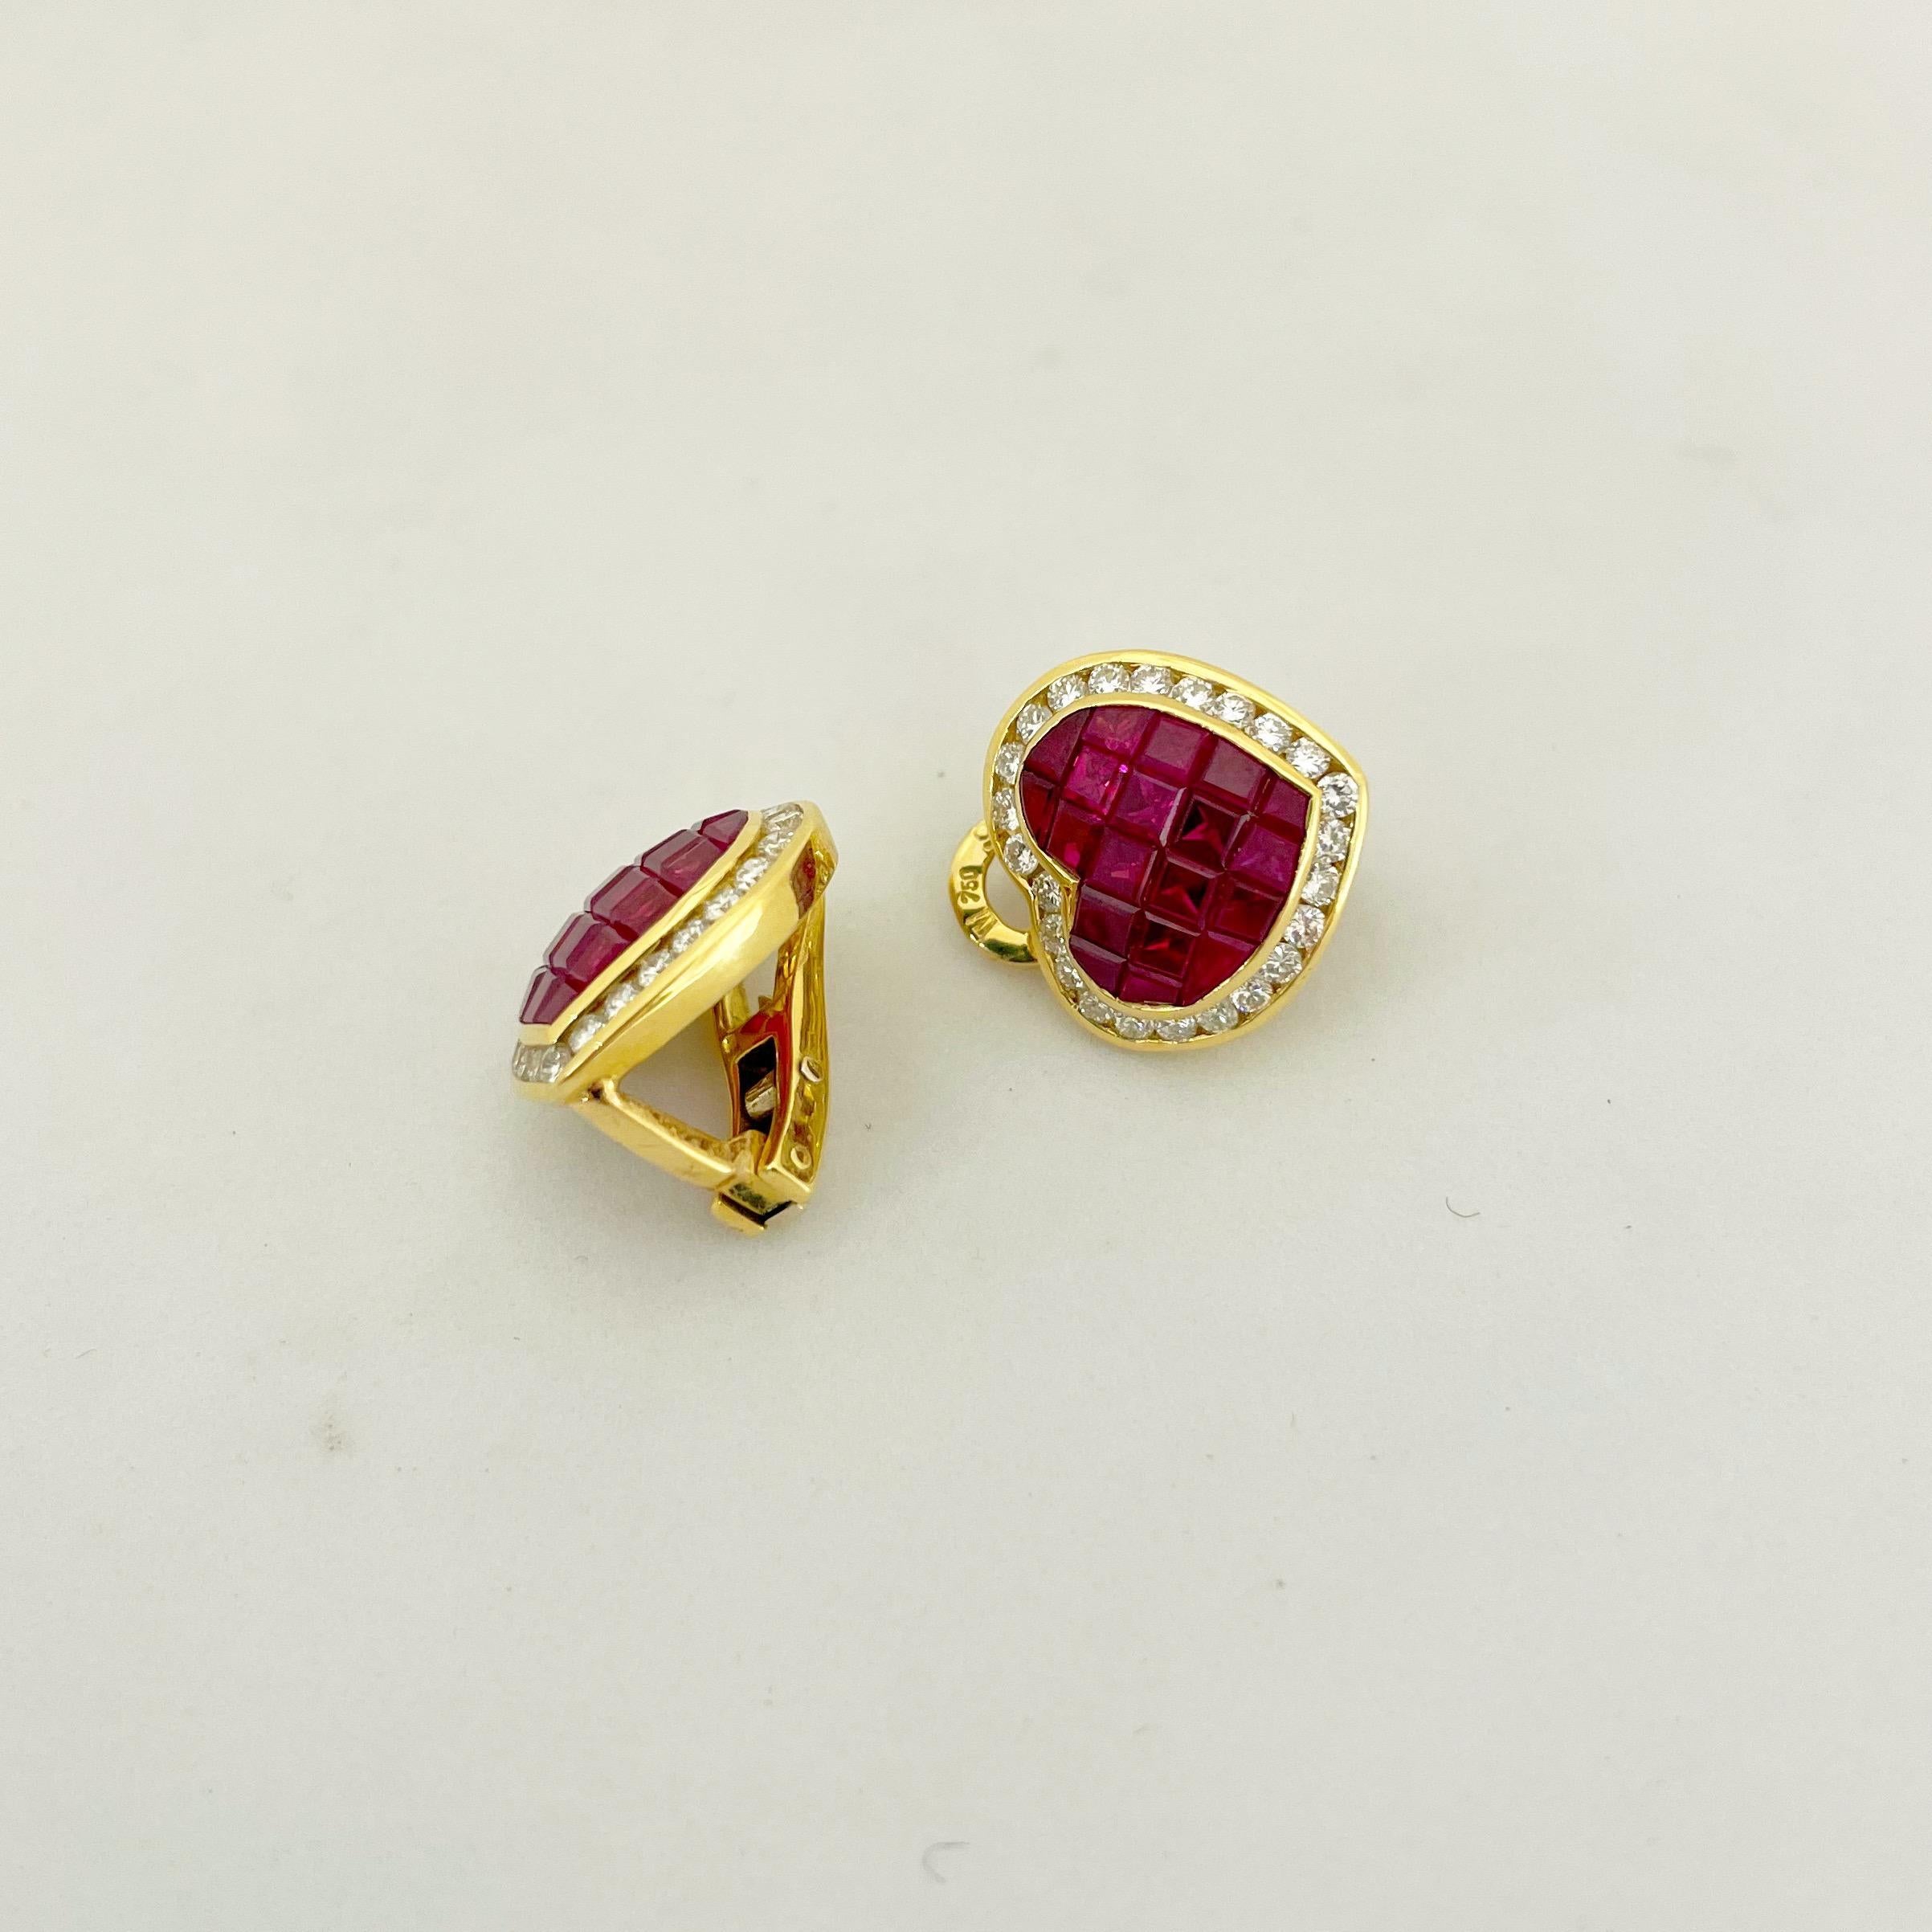 Contemporary Cellini 18 Karat Gold 5.20 Carat Ruby and 1.30 Carat Diamond Heart Earrings For Sale